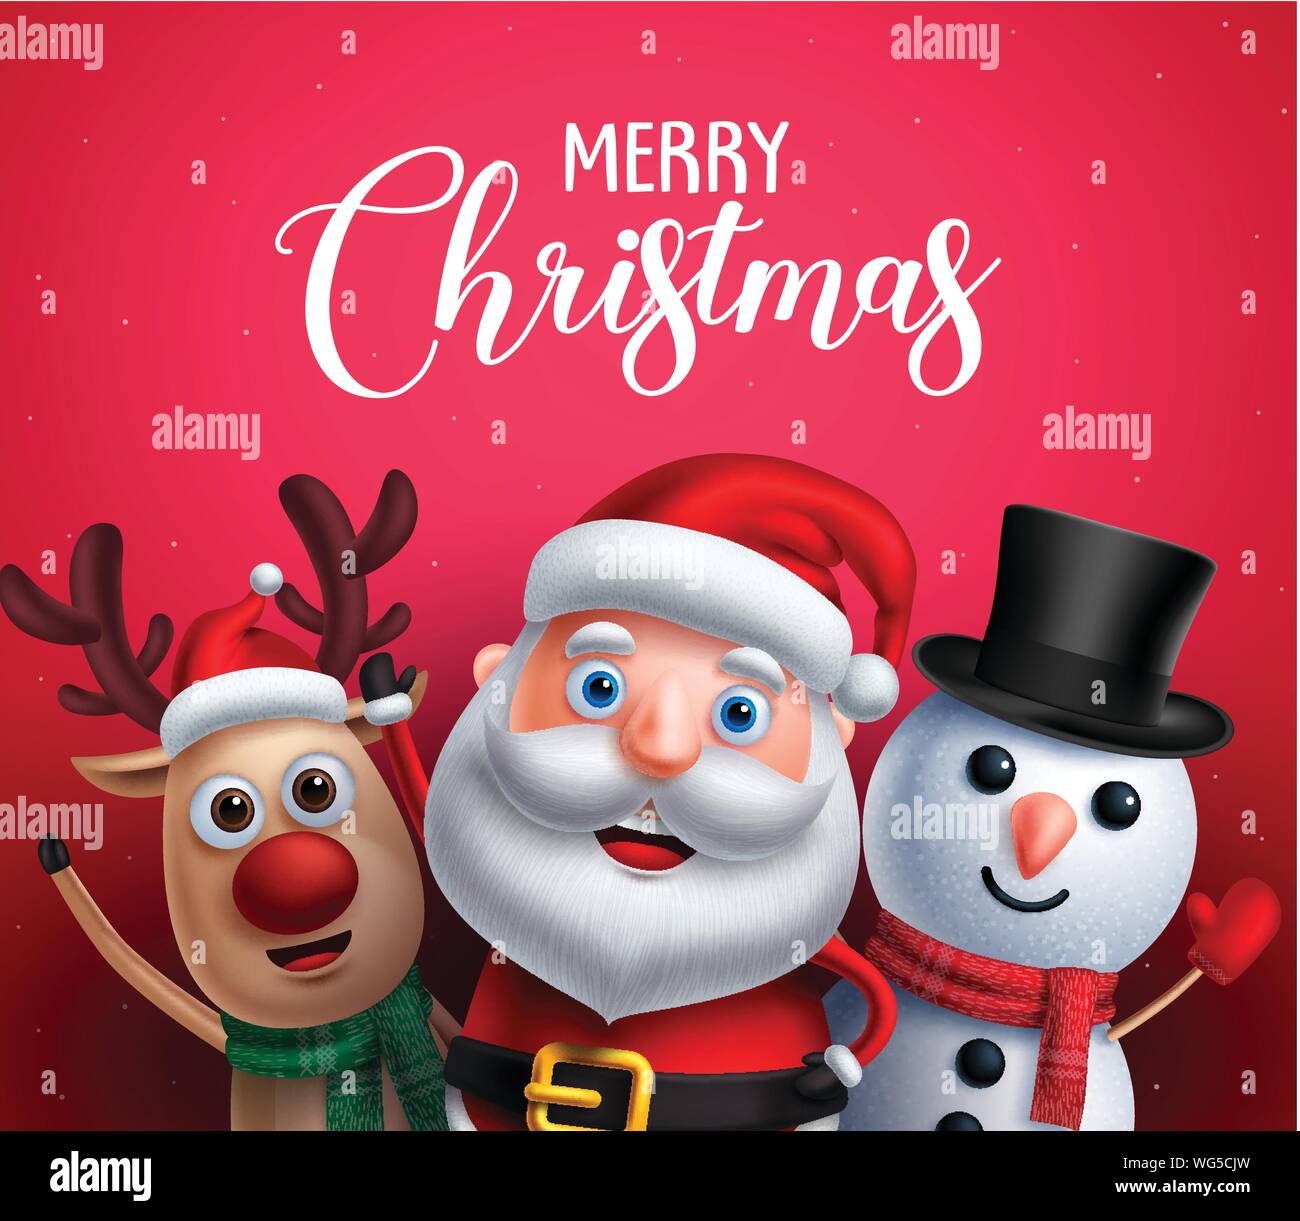 Merry christmas greeting text with santa claus, reindeer and ...